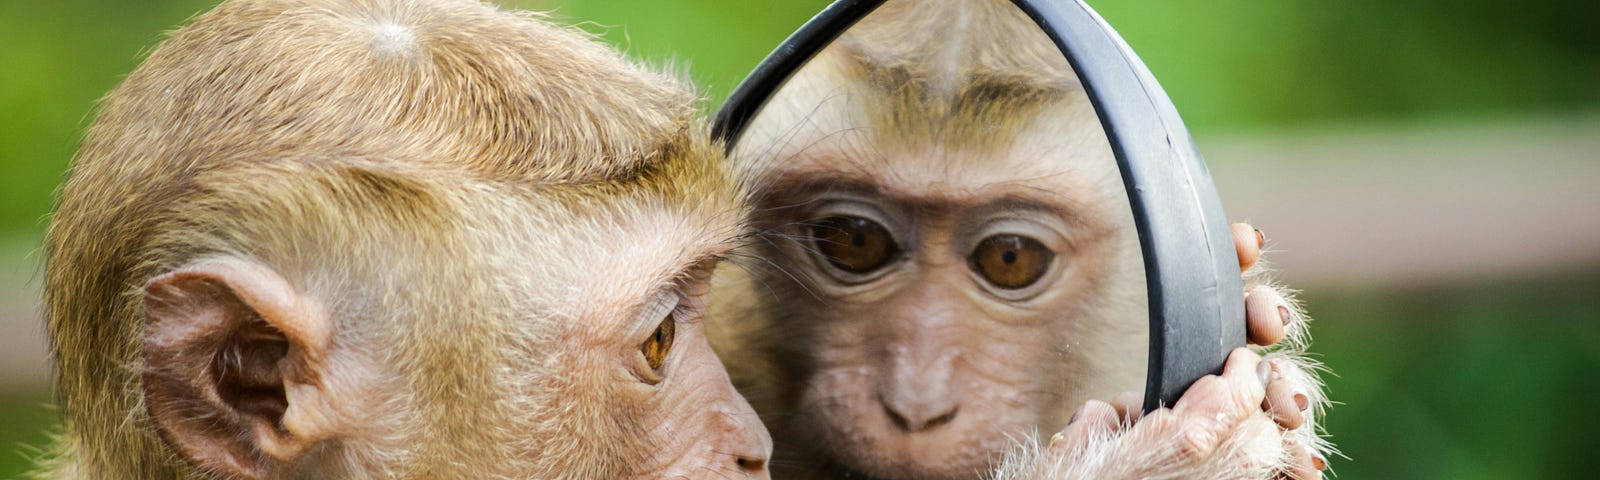 close-up photo of a primate with a mirror